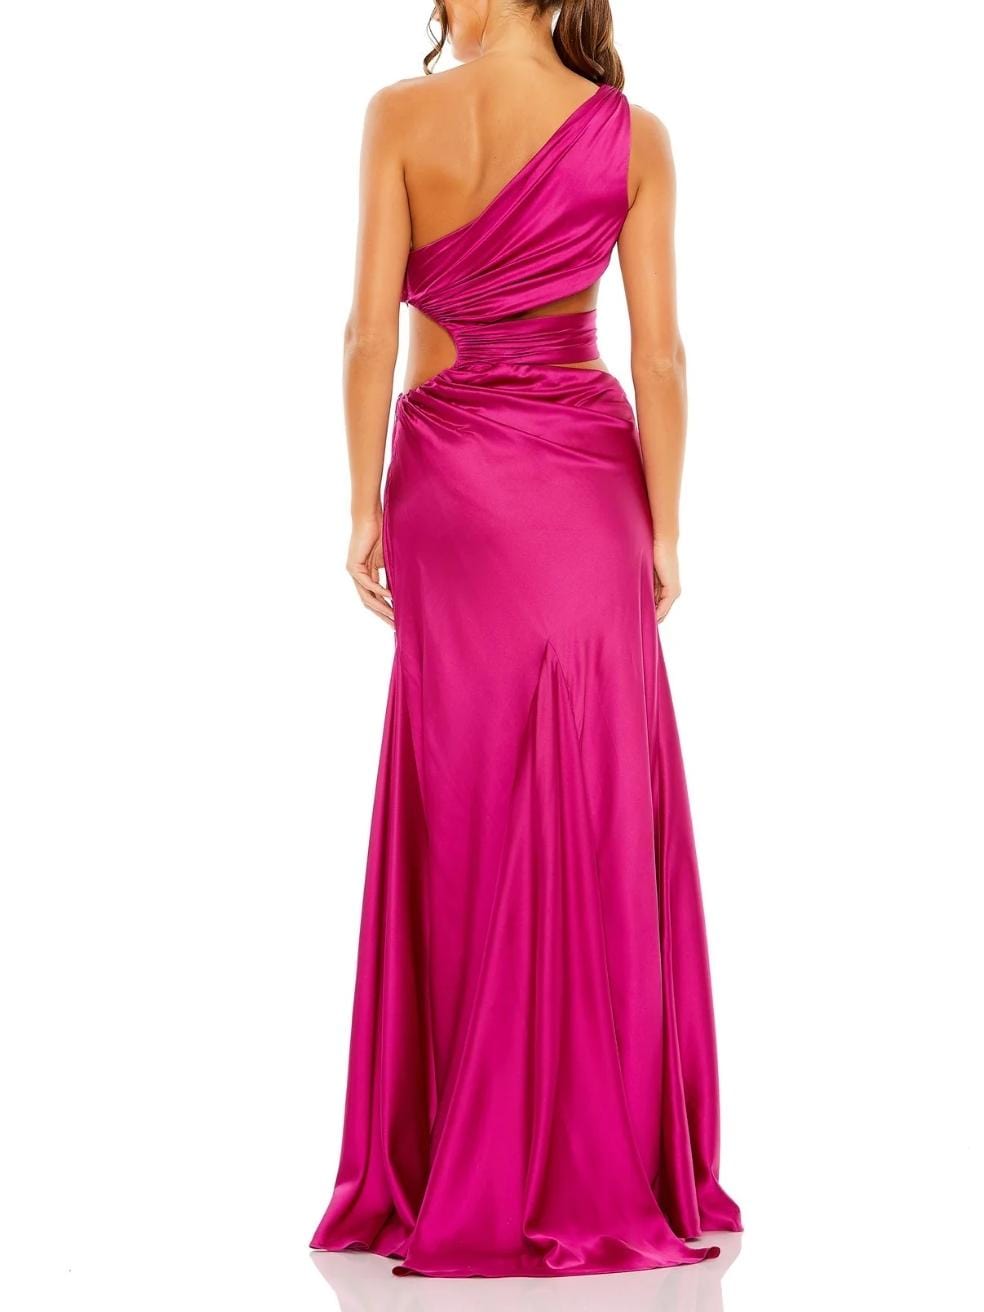 Cutout One-Shoulder Satin Gown in Pink